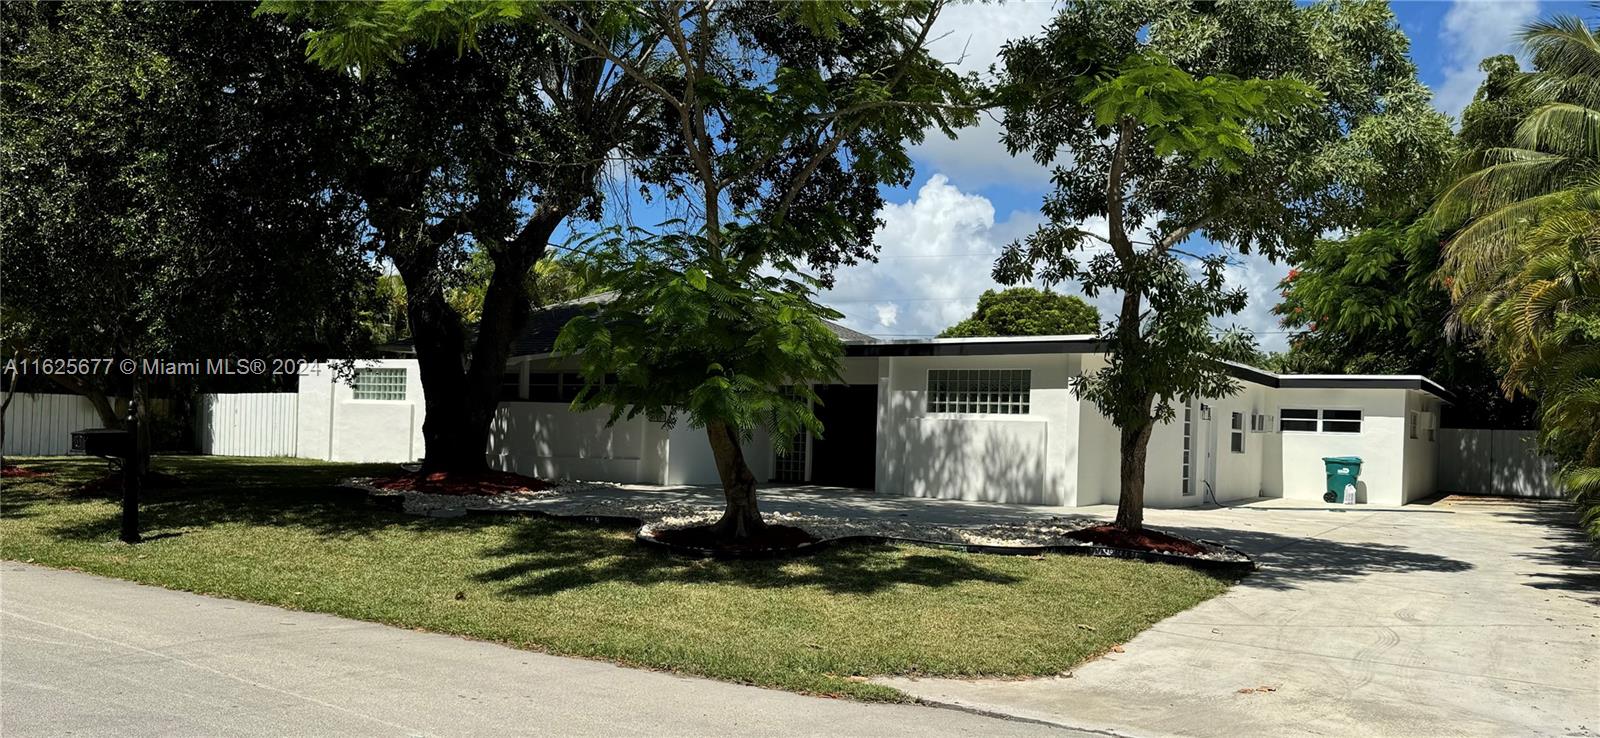 Discover this beautifully updated 5-bedroom, 3.5-bathroom home in the sought-after neighborhood of Cutler Bay, just off Old Cutler Road. Situated on a spacious 15,000 sq. ft. lot, this property offers comfort & modern amenities. The newly renovated kitchen features brand-new appliances and elegant countertops, perfect for home chefs. Soaring vaulted ceilings enhance the open living areas, creating a bright and airy feel. The master suite includes an en-suite bathroom, and four additional bedrooms provide ample space for family and guests. Large studio-like converted double garage can be a den, man-cave, workshop, or music room. Large backyard, with room for pool, is perfect for outdoor activities & relaxation. Combining modern updates with timeless charm, this home is ideal for families.